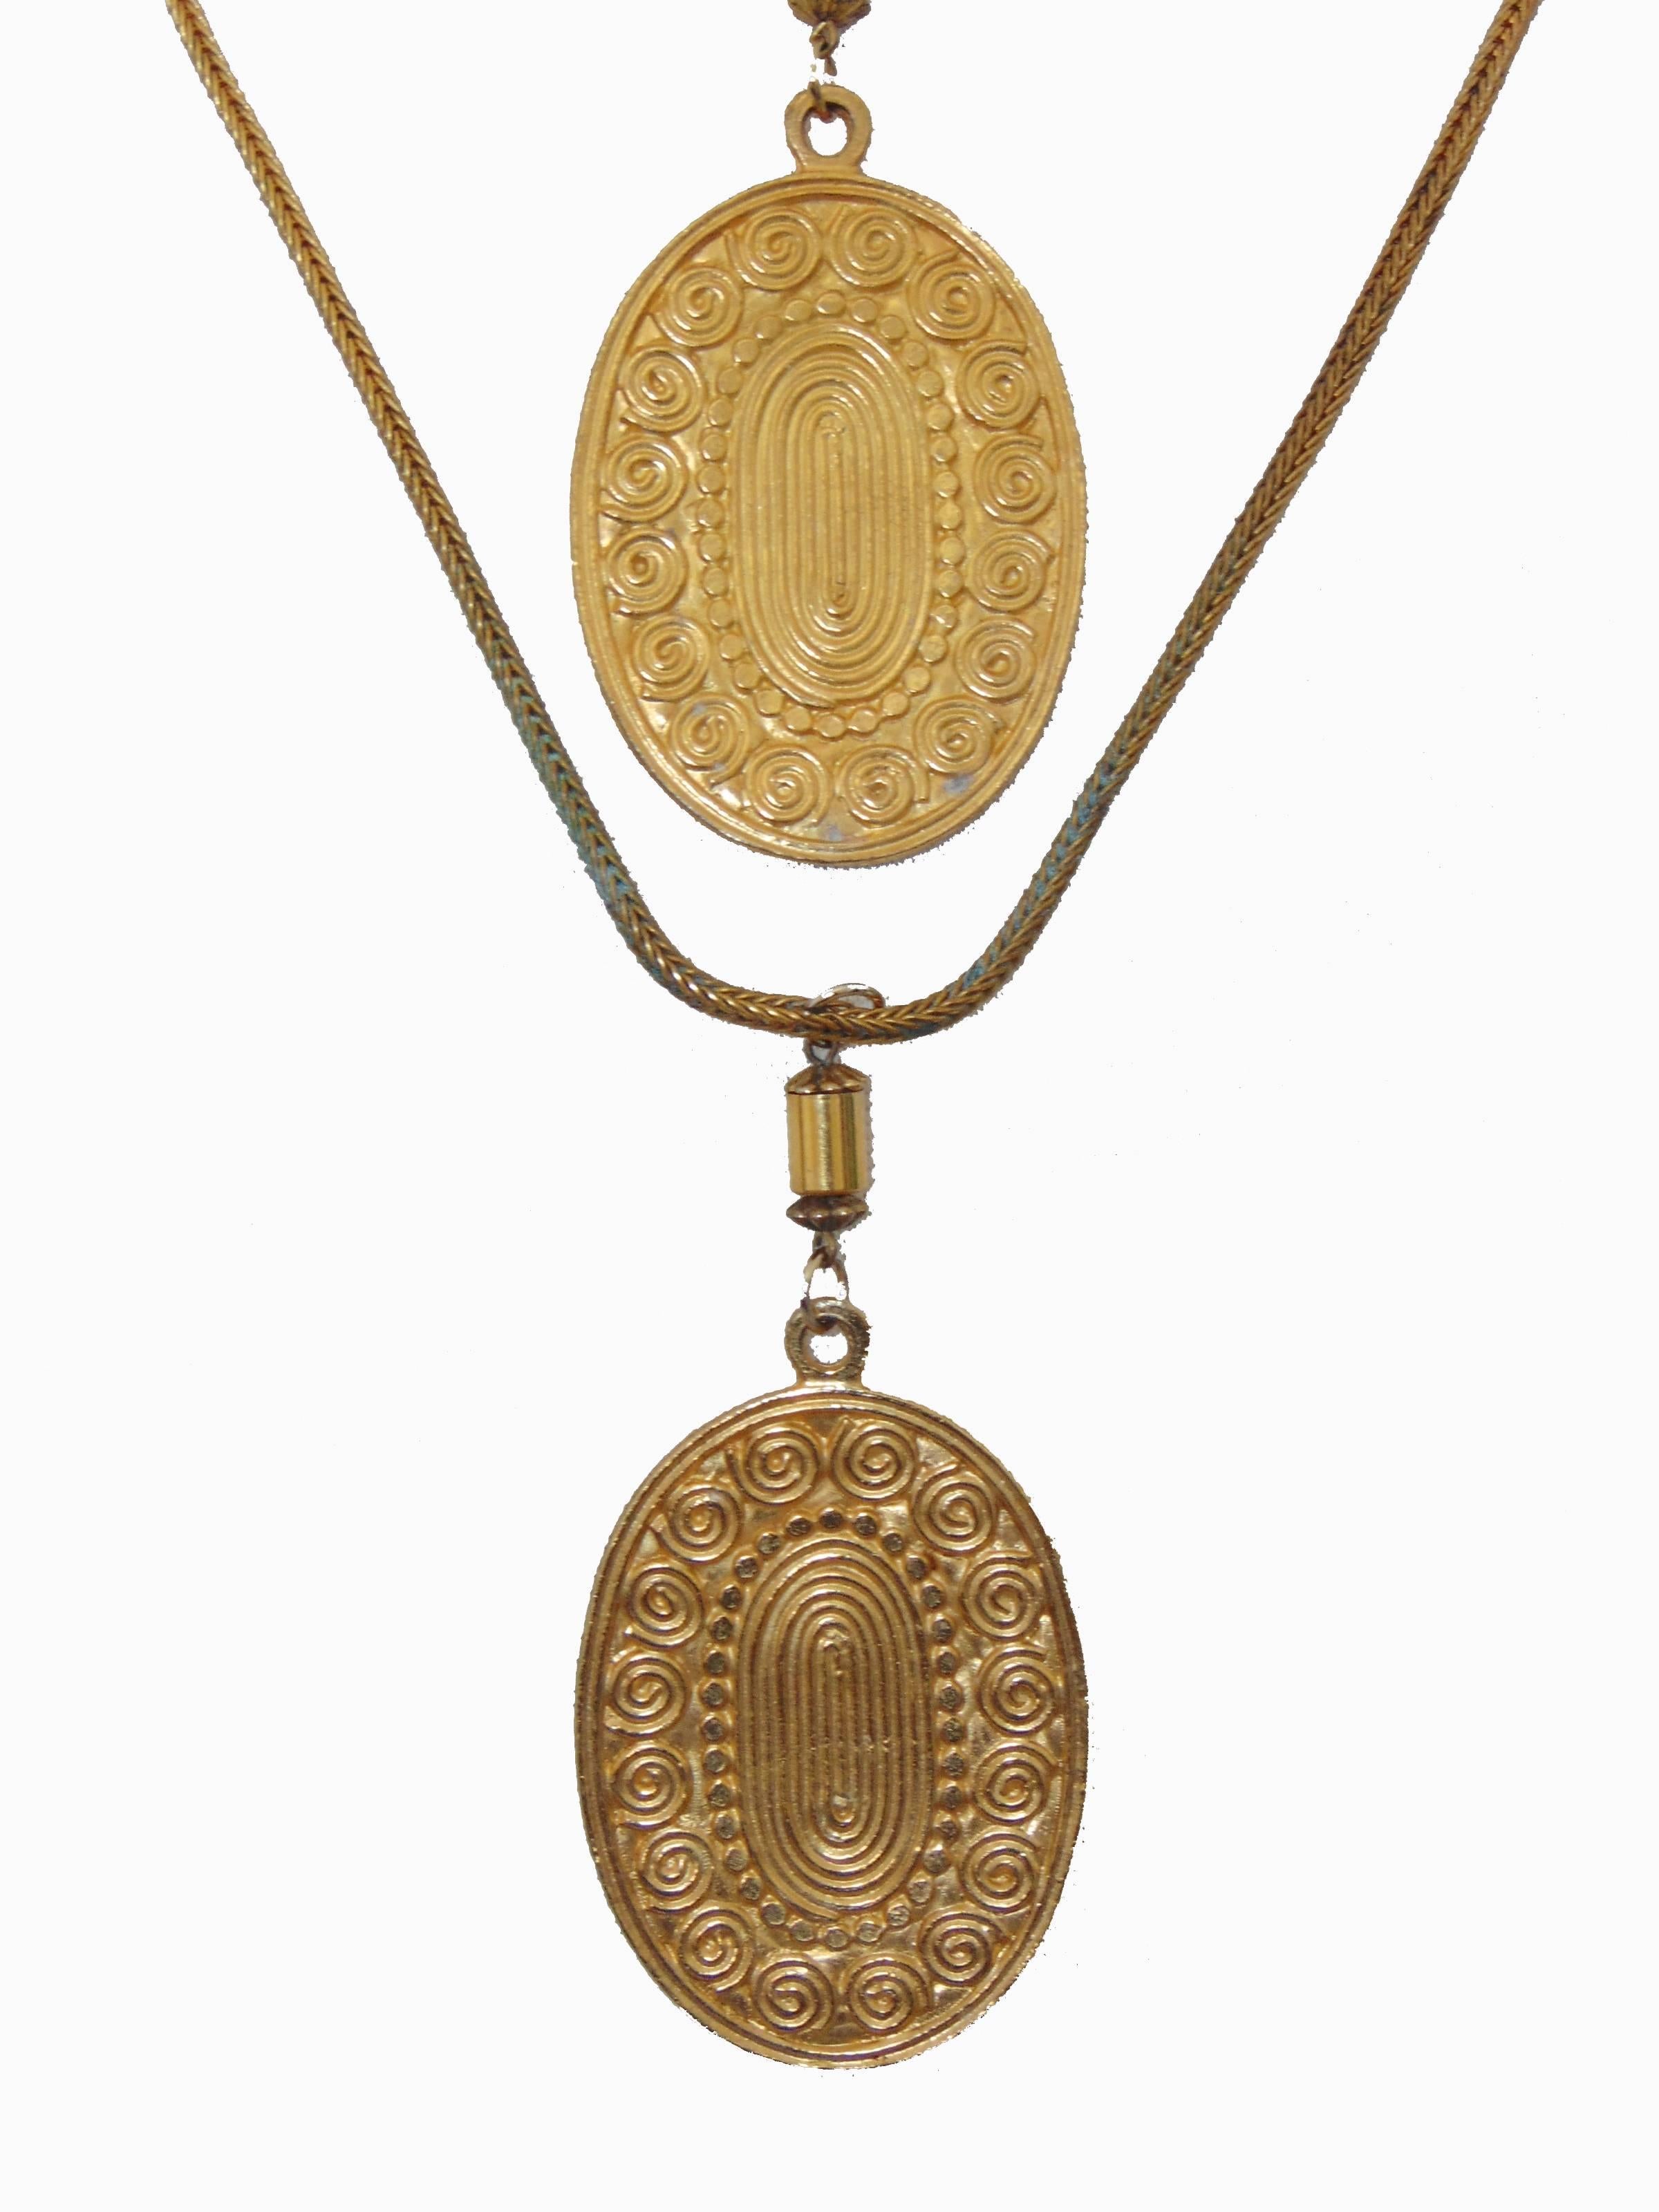 Etruscan Revival Yves Saint Laurent Gypsy Coin Necklace Gold Metal Runway 1970s